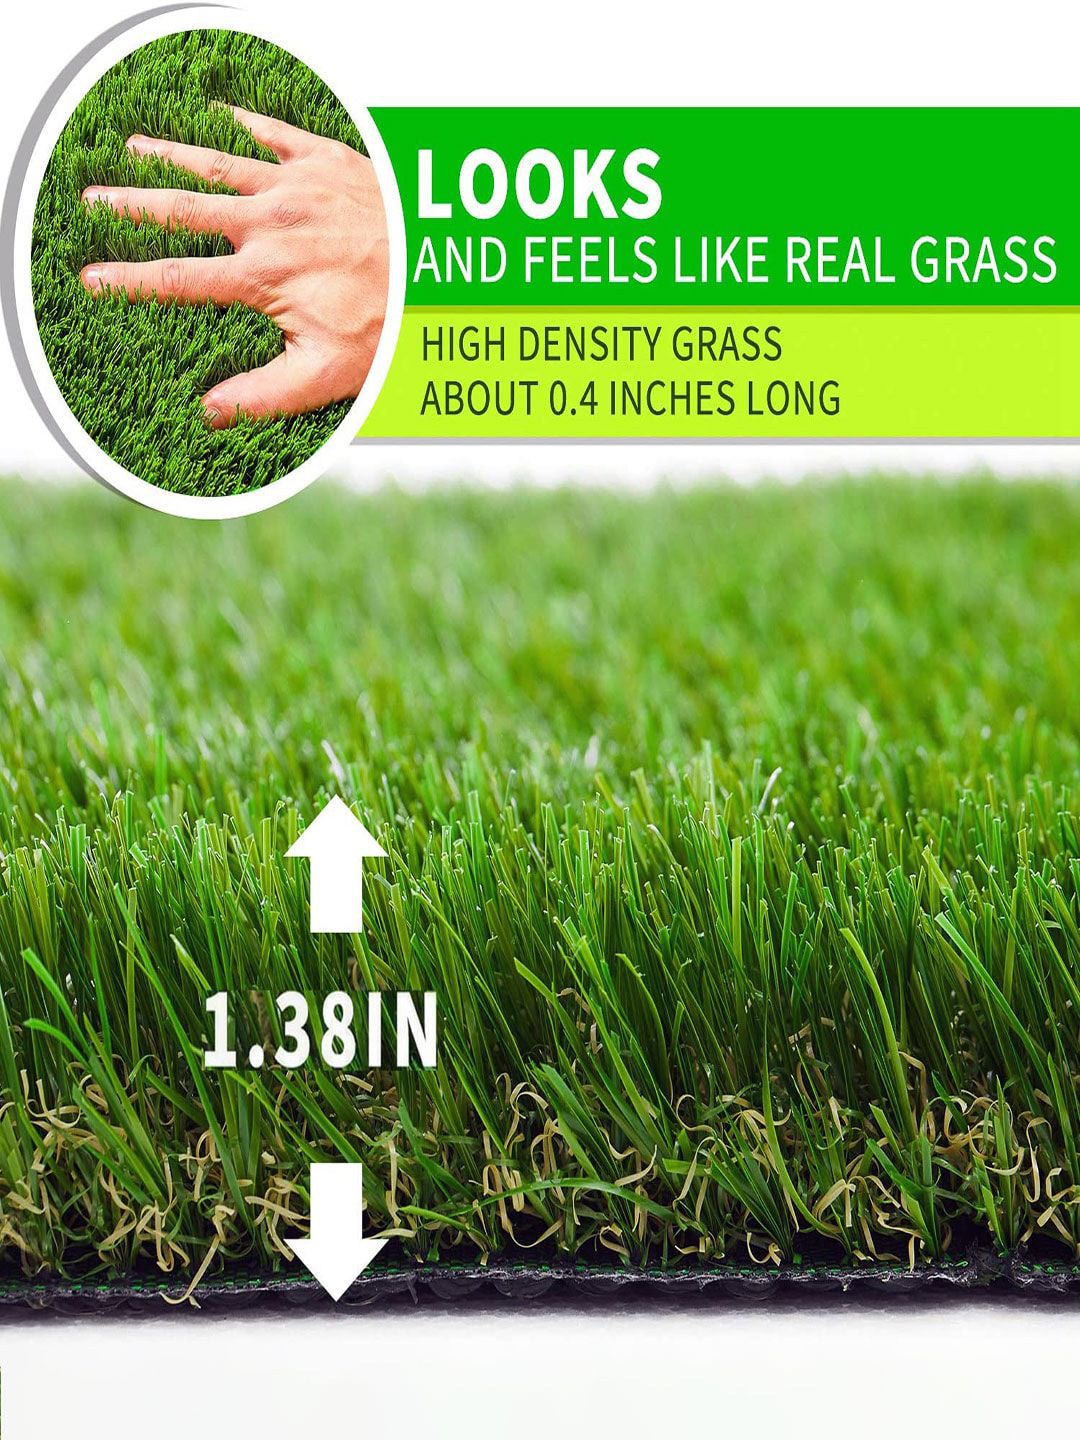 LUXEHOME INTERNATIONAL Green Artificial Grass UV Resistant Floor Runner Price in India